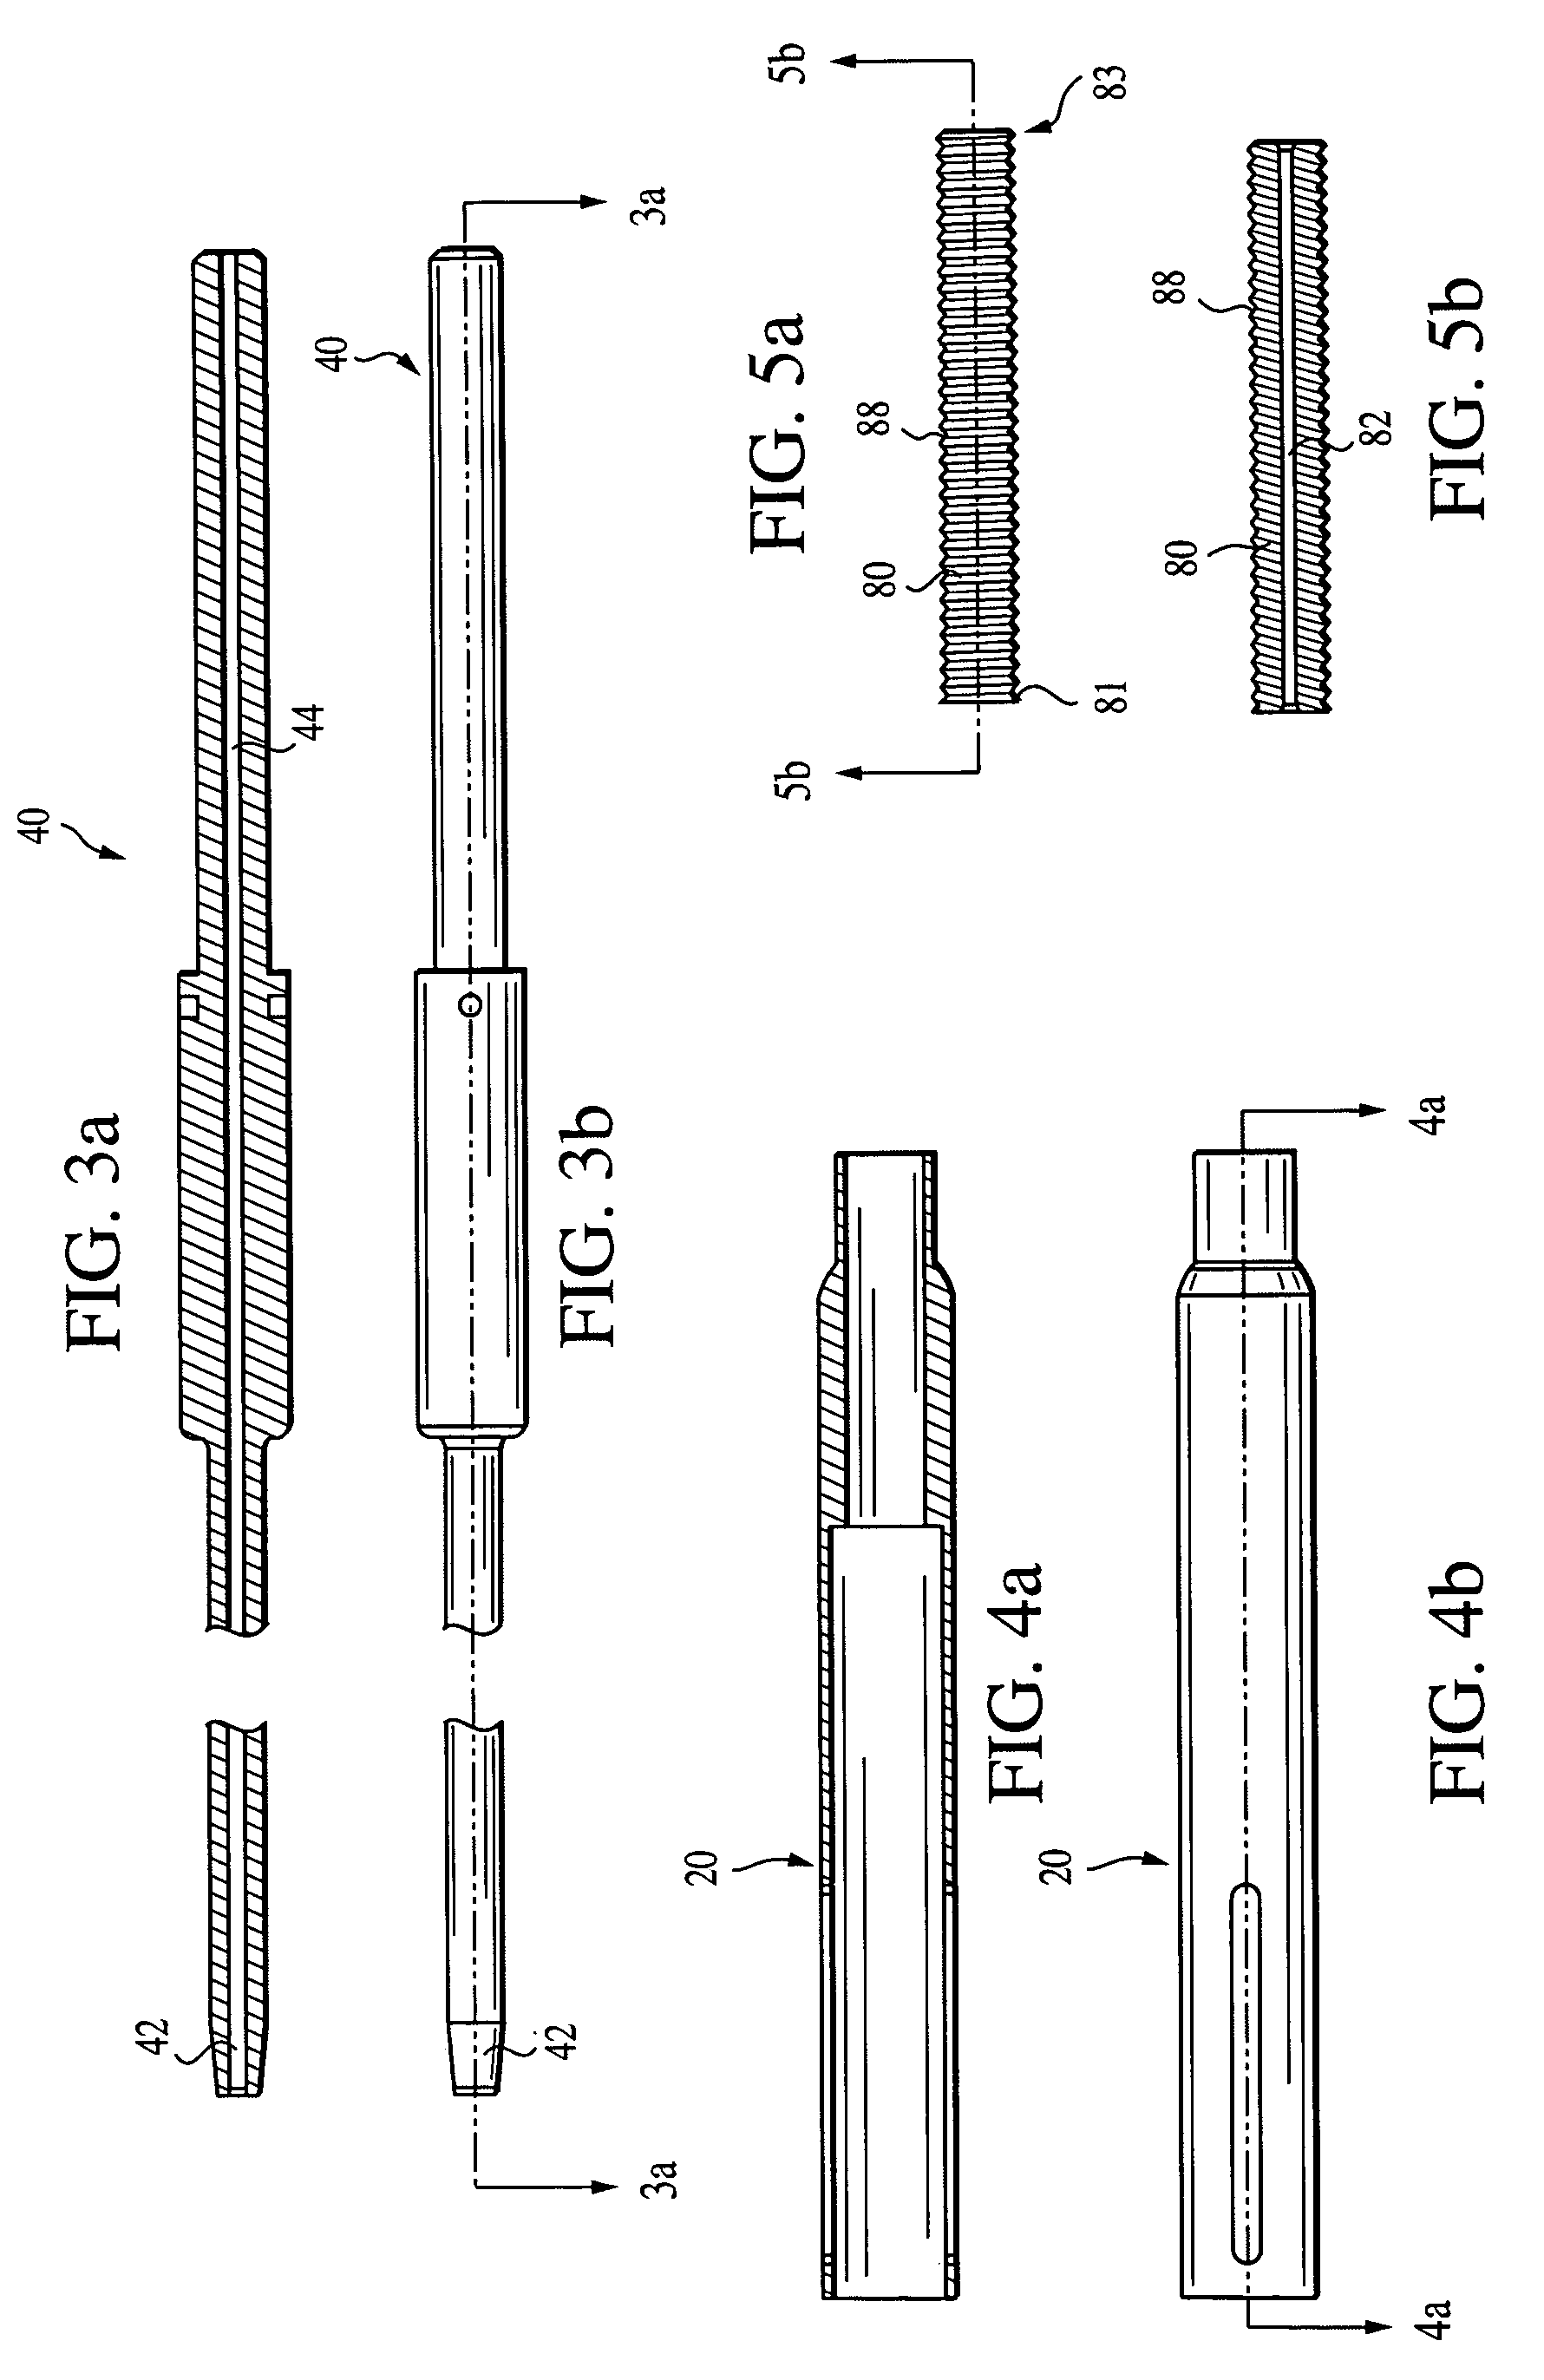 Suture tensioning device